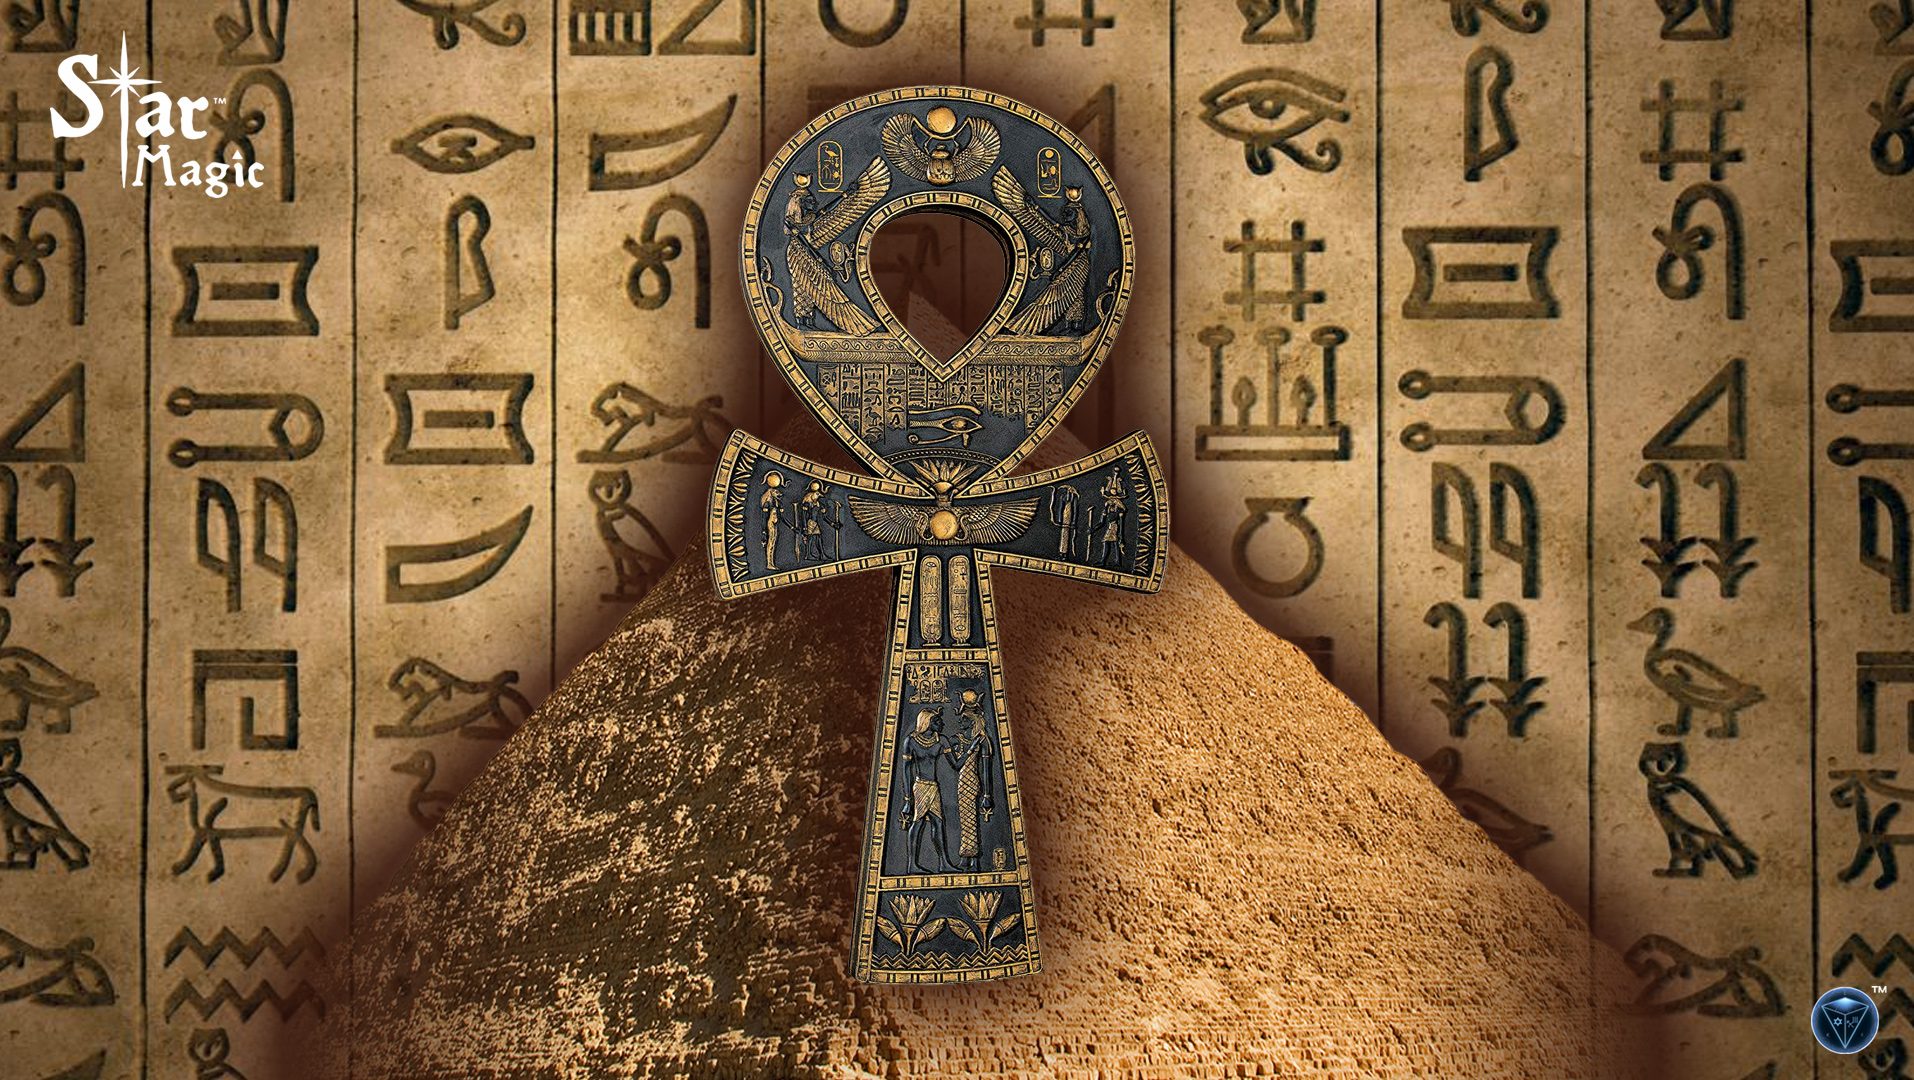 What are Egyptian Hieroglyphics?